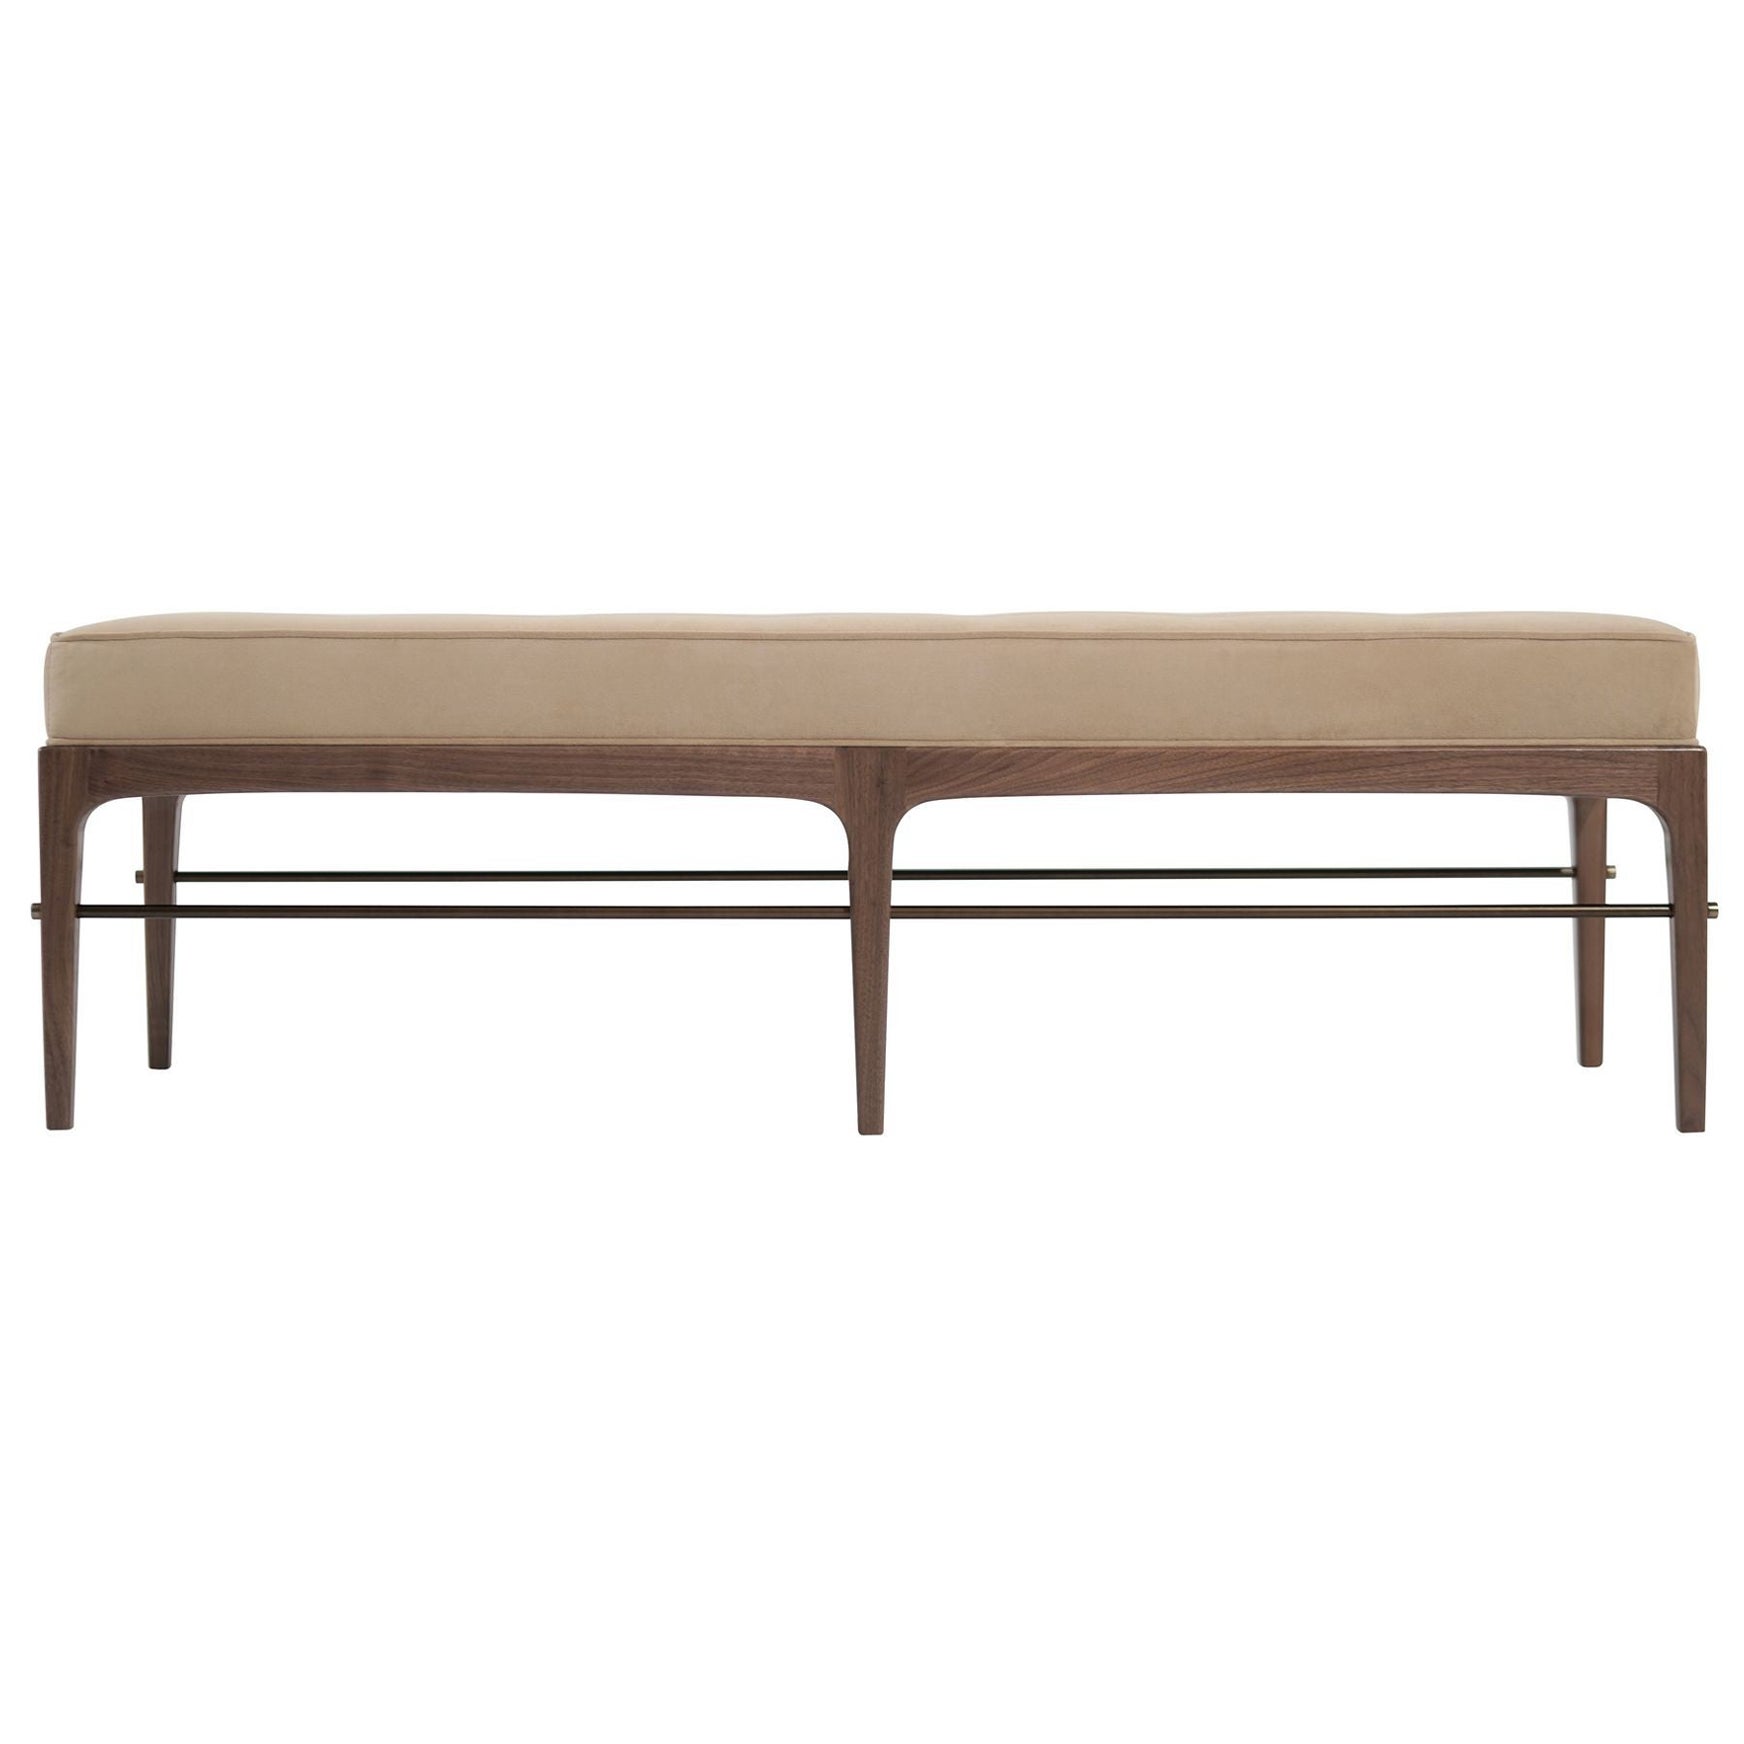 Linear Bench in Natural Wanut Series 60 by Stamford Modern